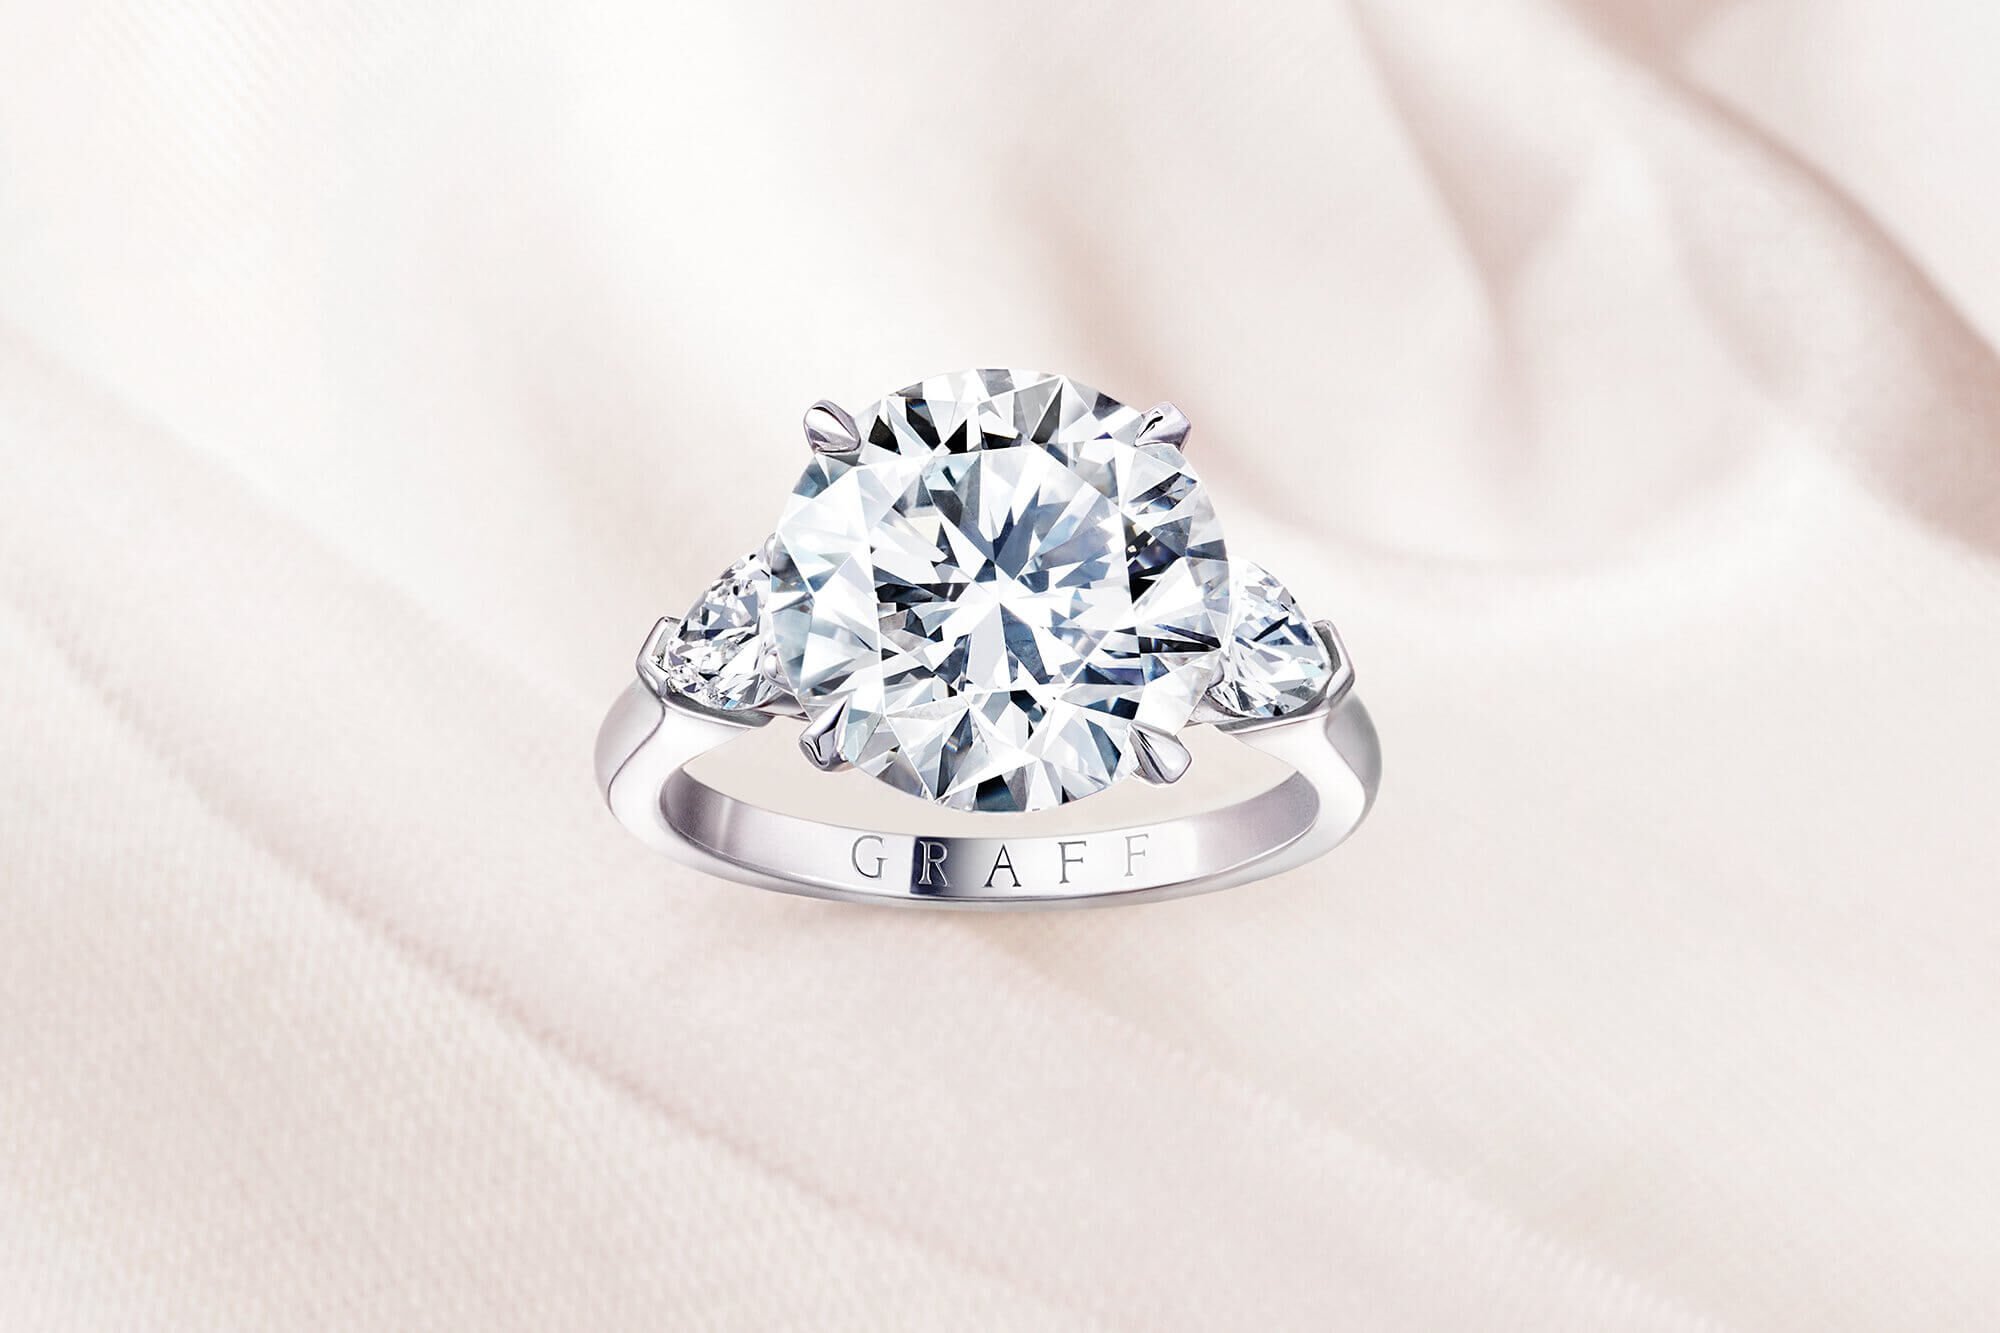 A Graff round diamond Promise setting engagement ring 